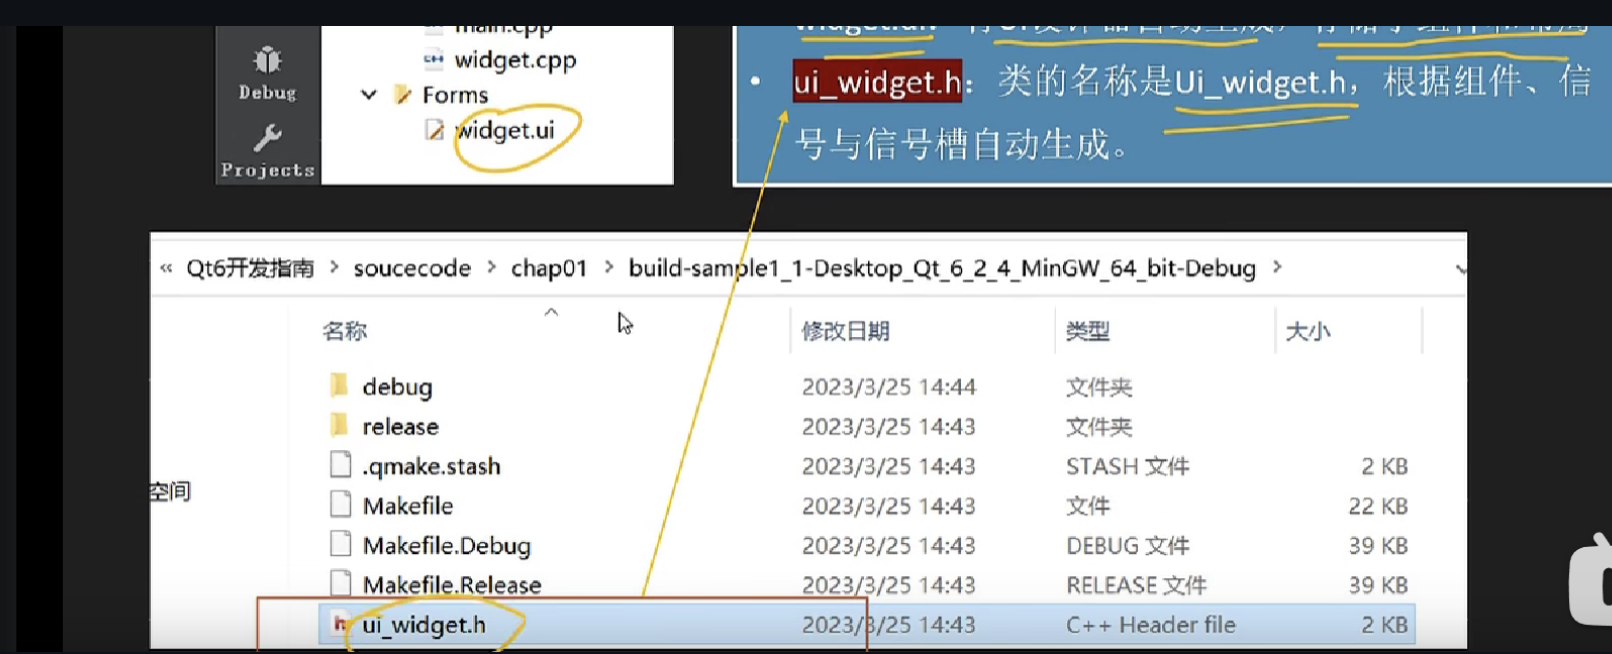 [External link image transfer failed, the source site may have an anti-leeching mechanism, it is recommended to save the image and upload it directly (img-9WEMX9Gy-1687505105908) (C:\Users\27285\AppData\Roaming\Typora\typora-user-images\ image-20230623121420295.png)]